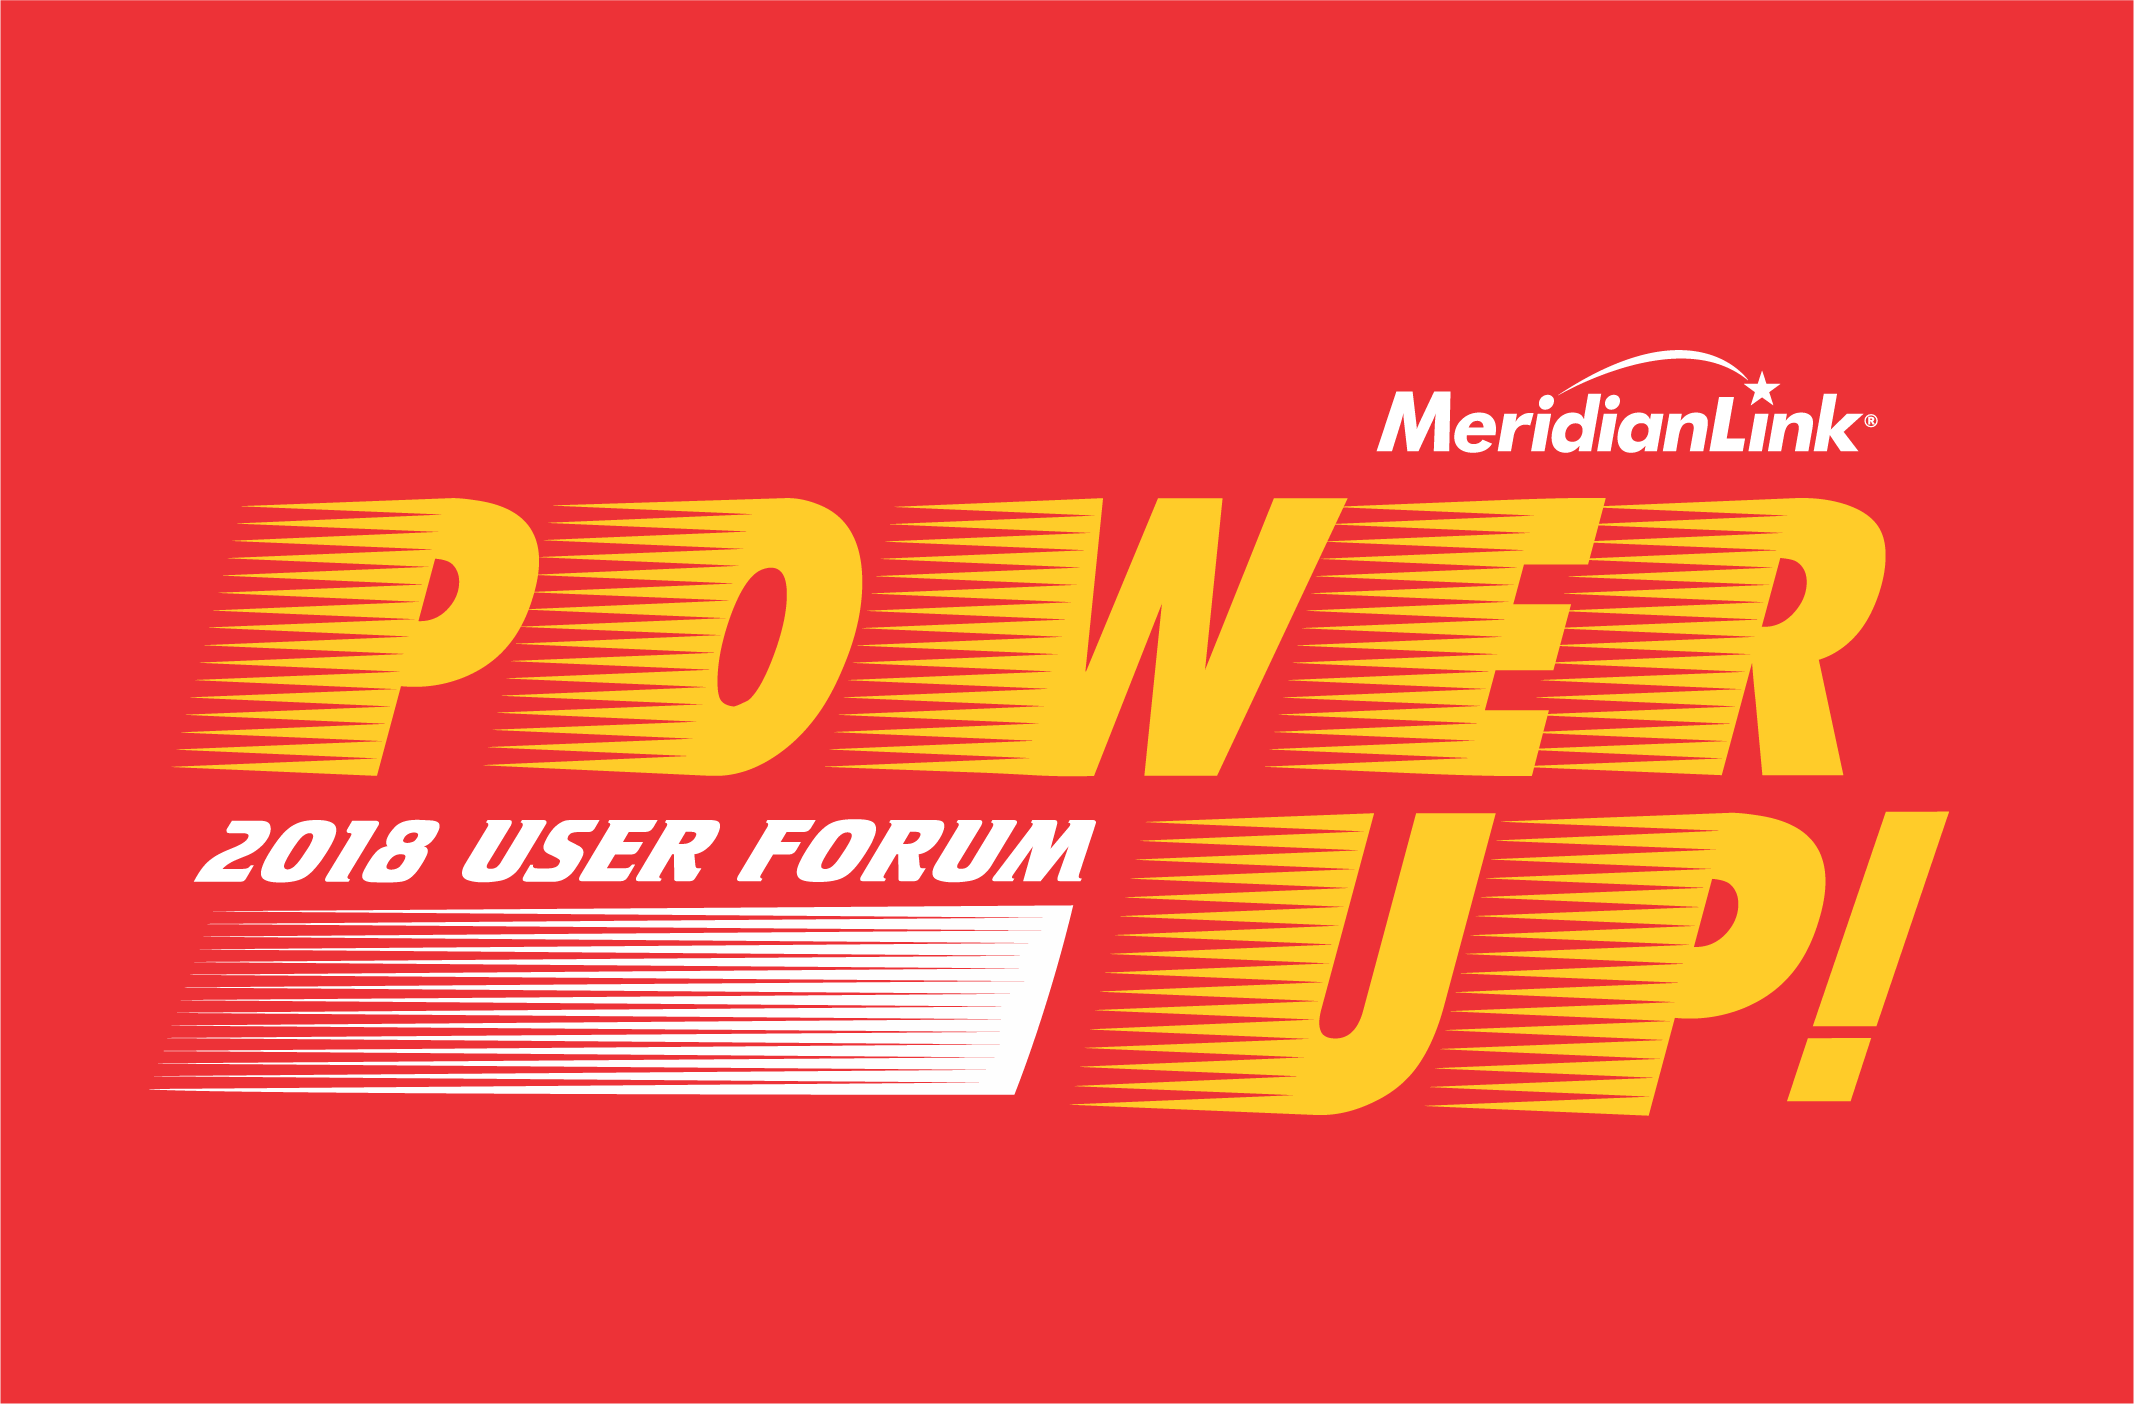 A record 440+ attendees will enjoy the MeridianLink 2018 User Forum